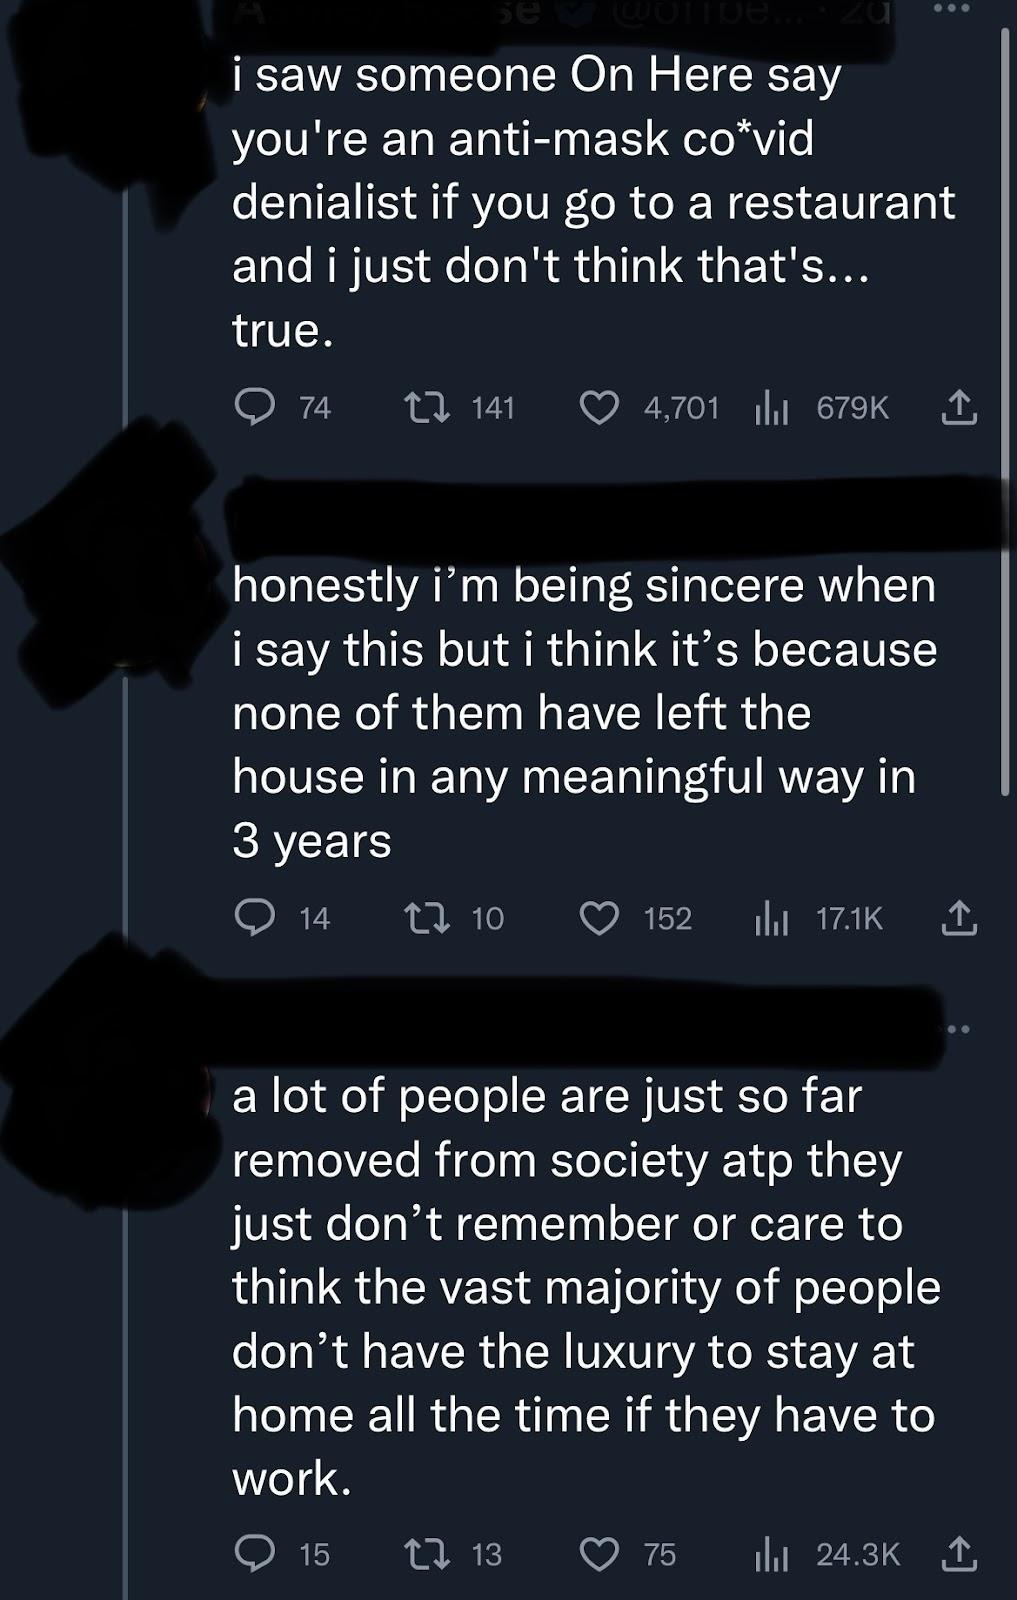 tweet that reads, “i saw someone On Here say you’re an anti-mask co*vid denialist if you go to a restaurant and i just don’t think that’s… true” a response to the initial tweet reads, “honestly i’m being sincere when i say this but i think it’s because none of them have left the house in any meaningful way in 3 years. A lot of people are just so far removed from society atp they just don’t remember or care to thin the vast majority of people don’t have the luxury to stay at home all the time if they have to work.”